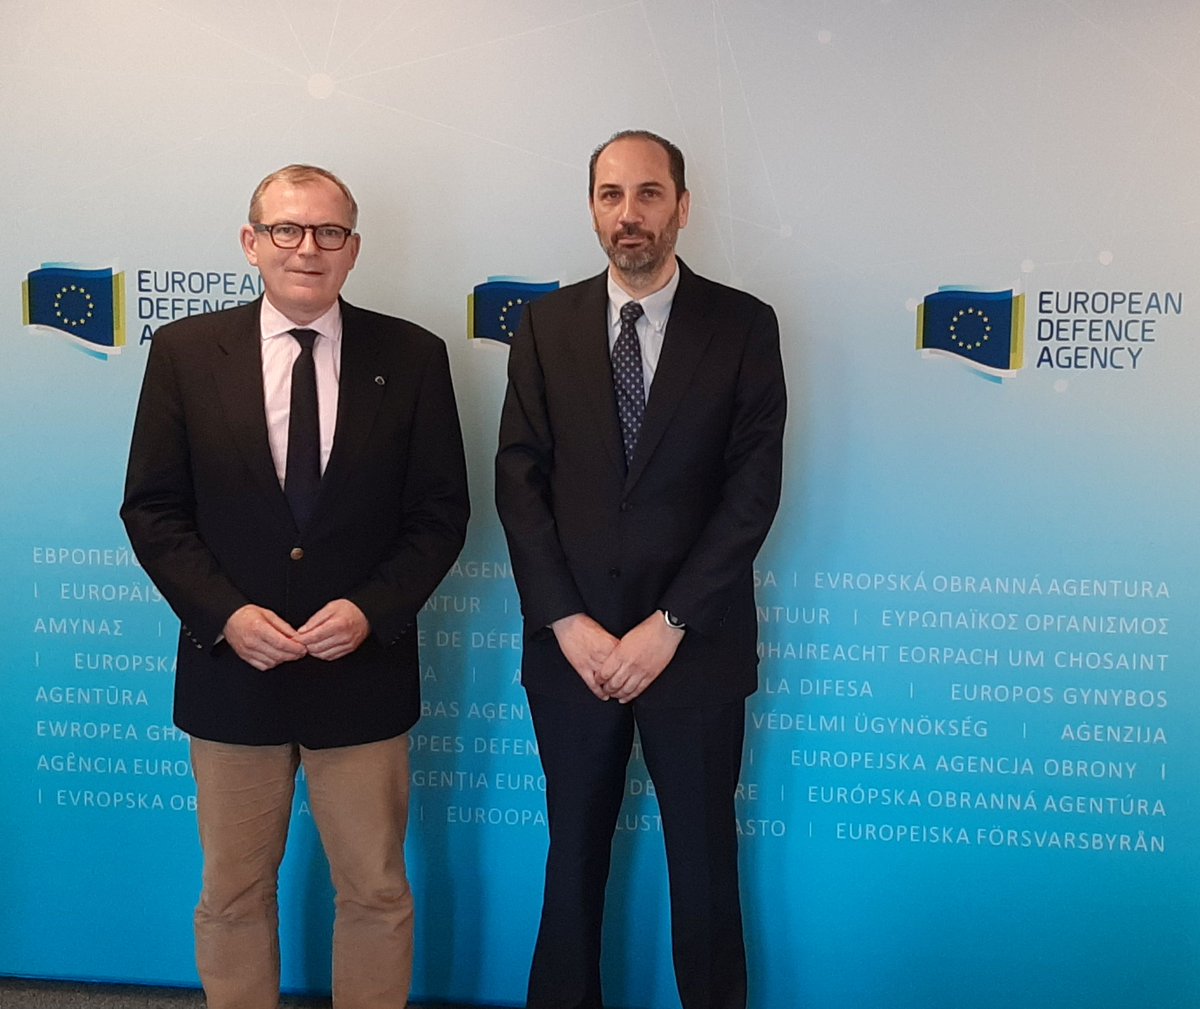 Very useful meeting at the @EUDefenceAgency with its Chief Executive Jiří Šedivý. An interesting exchange of views on #EUDefence and the cooperation of @DefenceCyprus with the EDA.